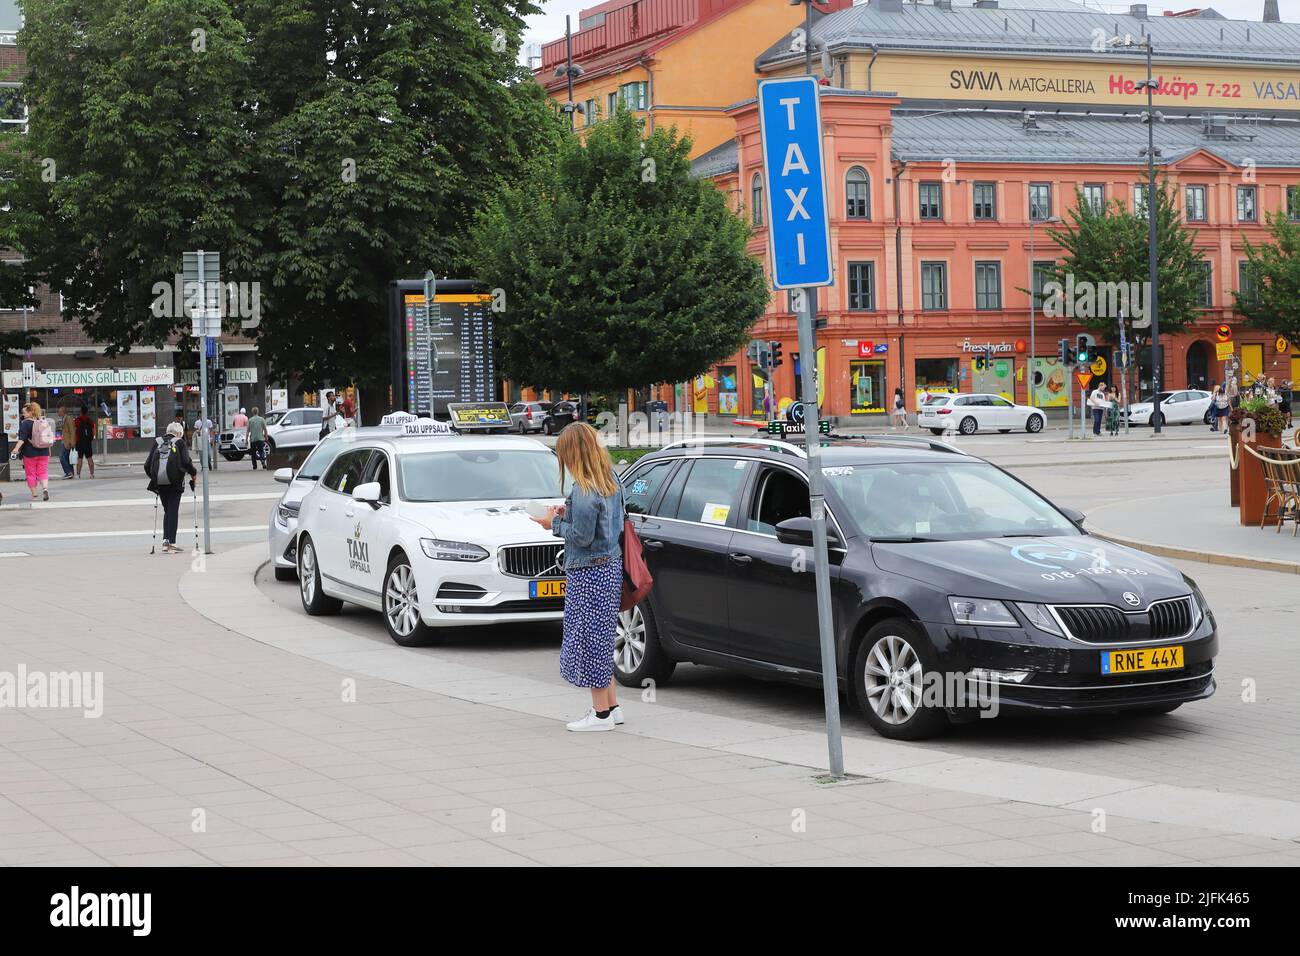 Uppsala, Sweden - July 2, 2022: Taxis at the taxi stand outside the Uppsala central railroad station. Stock Photo